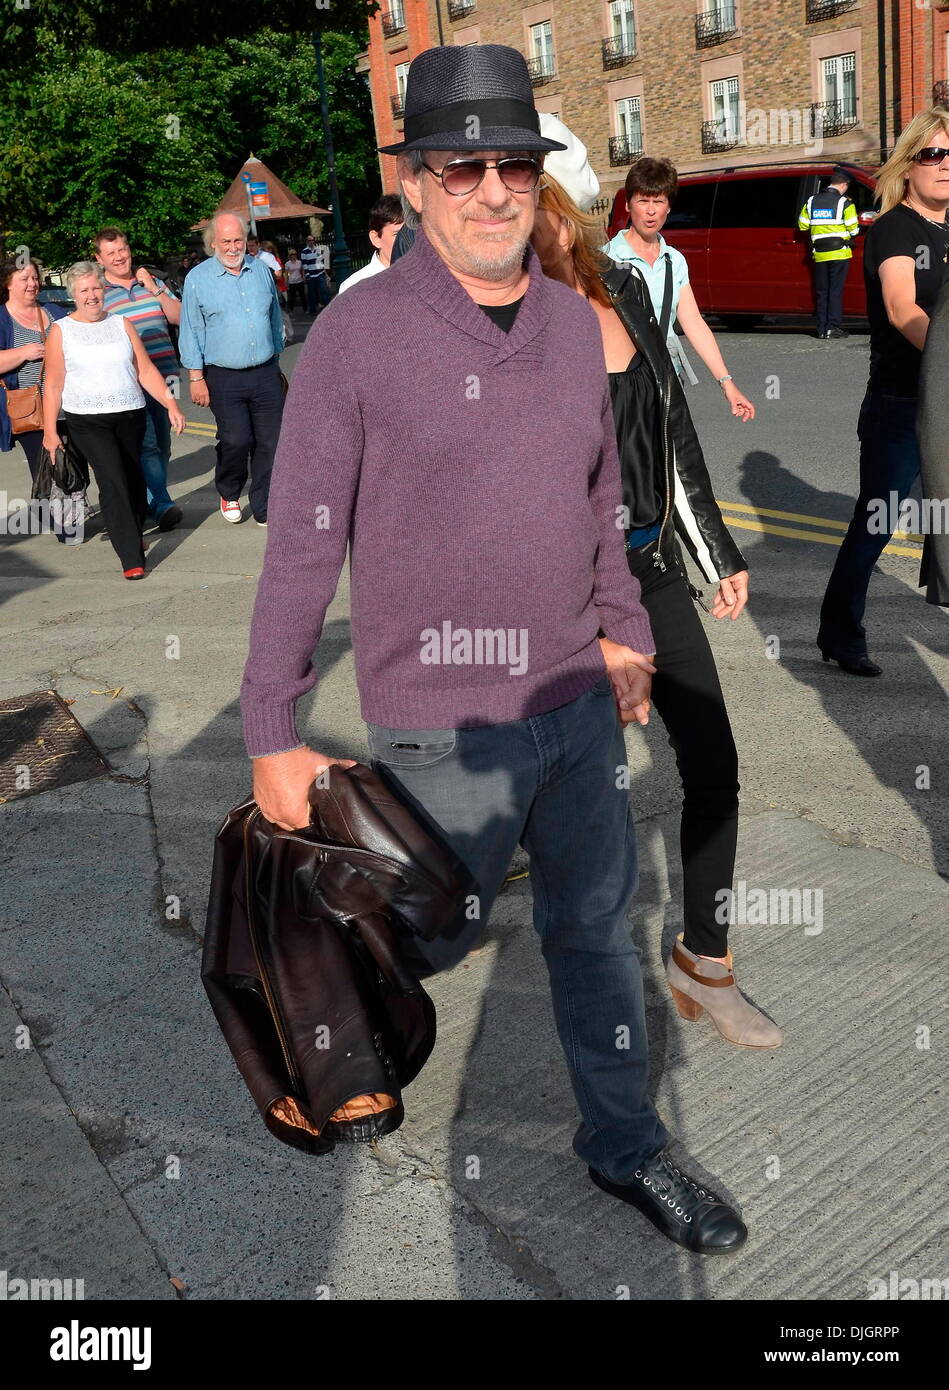 Steven Spielberg and Kate Capshaw arrive at the Bruce Springsteen concert at The RDS Dublin, Ireland - 17.07.12 Stock Photo